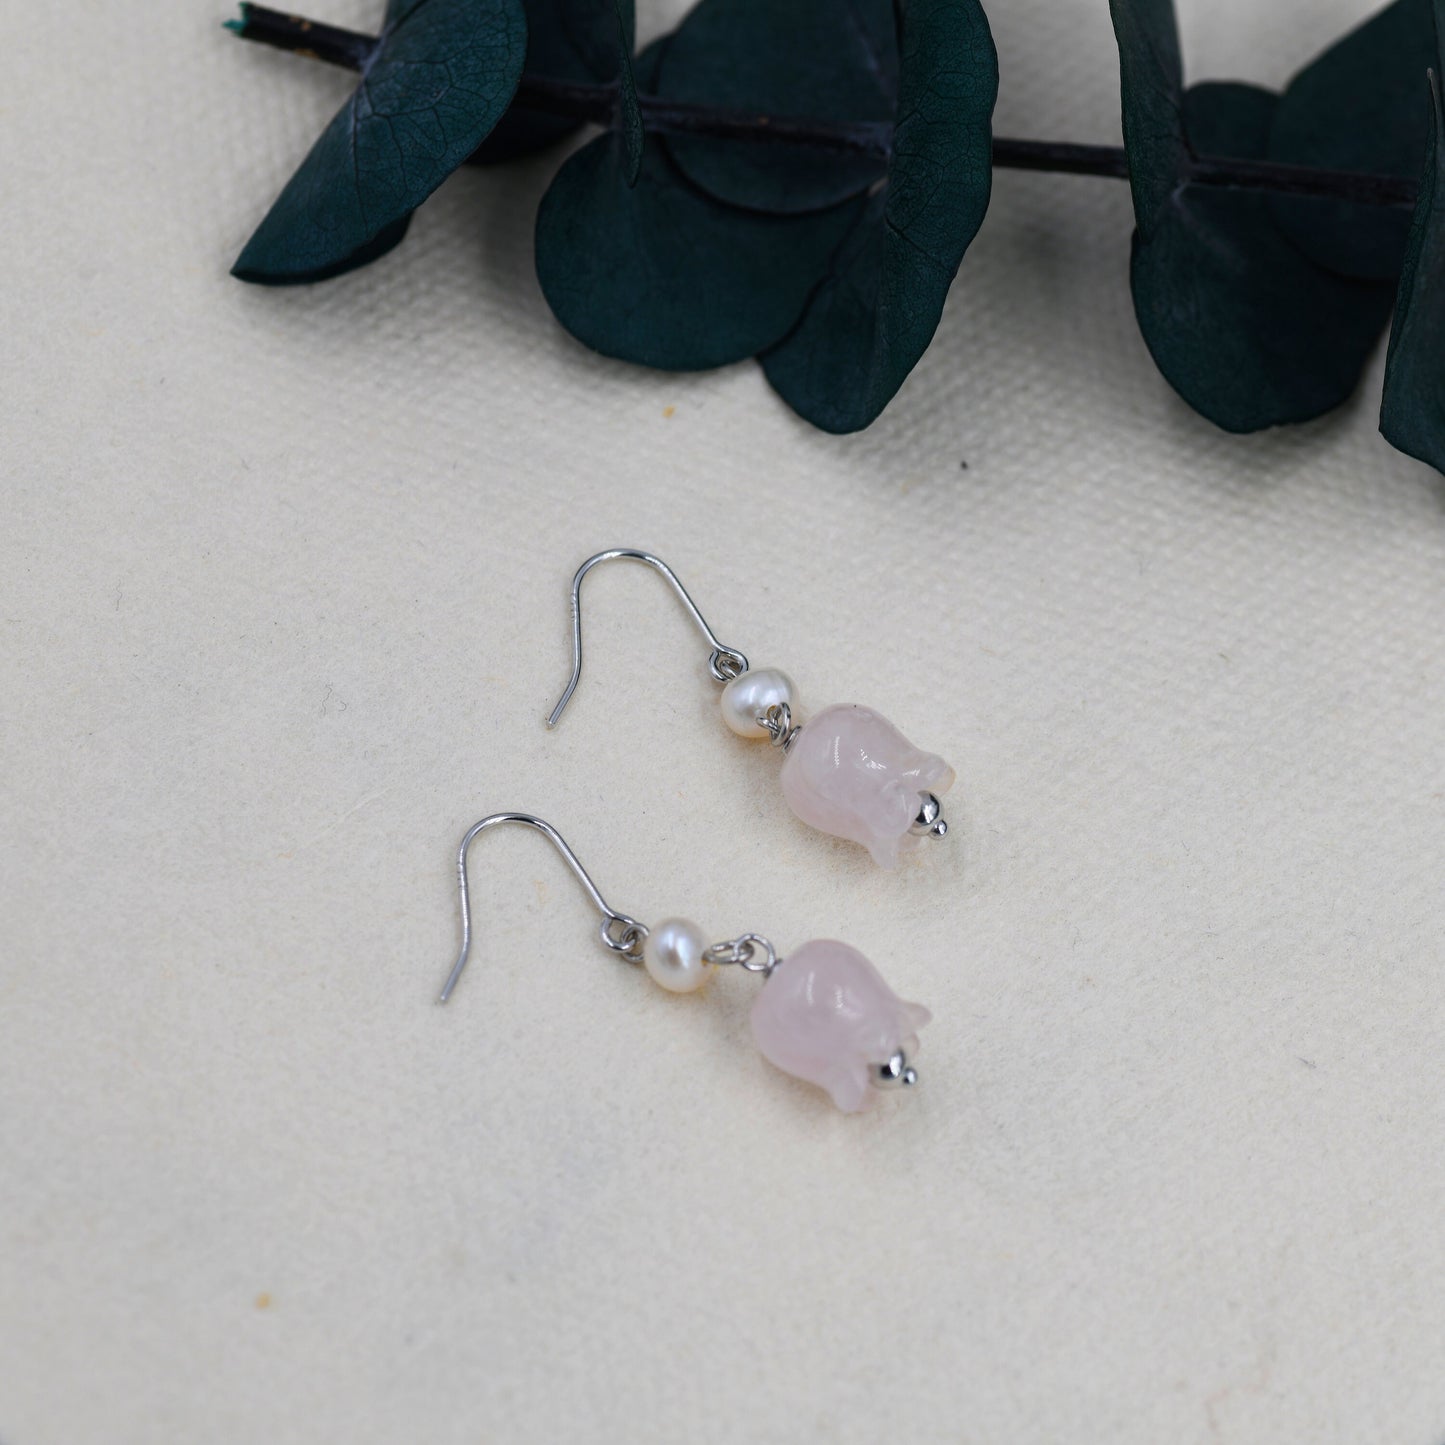 Carved Jade Lily of the valley Earrings in Sterling Silver with Natural Freshwater Pearls, Genuine Jade Flower Dangle Earrings,